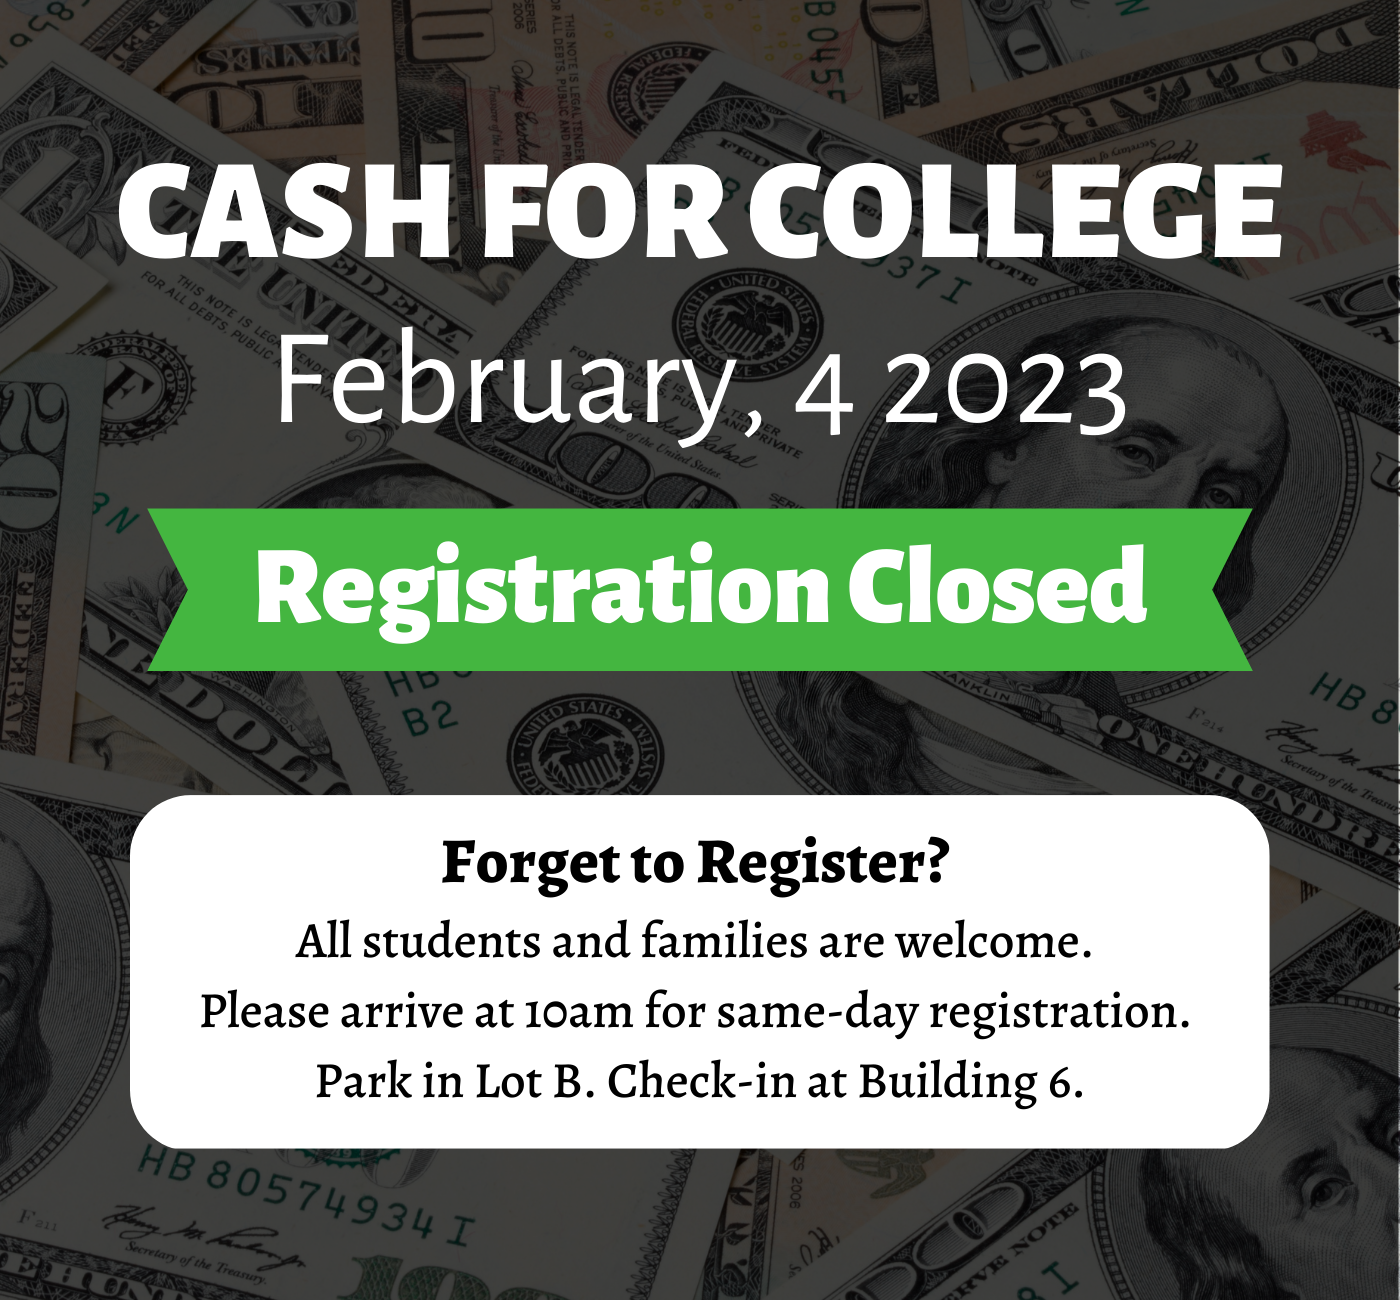 Cash 4 College 2/4/23 Registraiton Closed. Forget to register? All students & families are welcome. Please arrive at 10am for same-day registration. Park in Lot B. Check-in at Building 6.